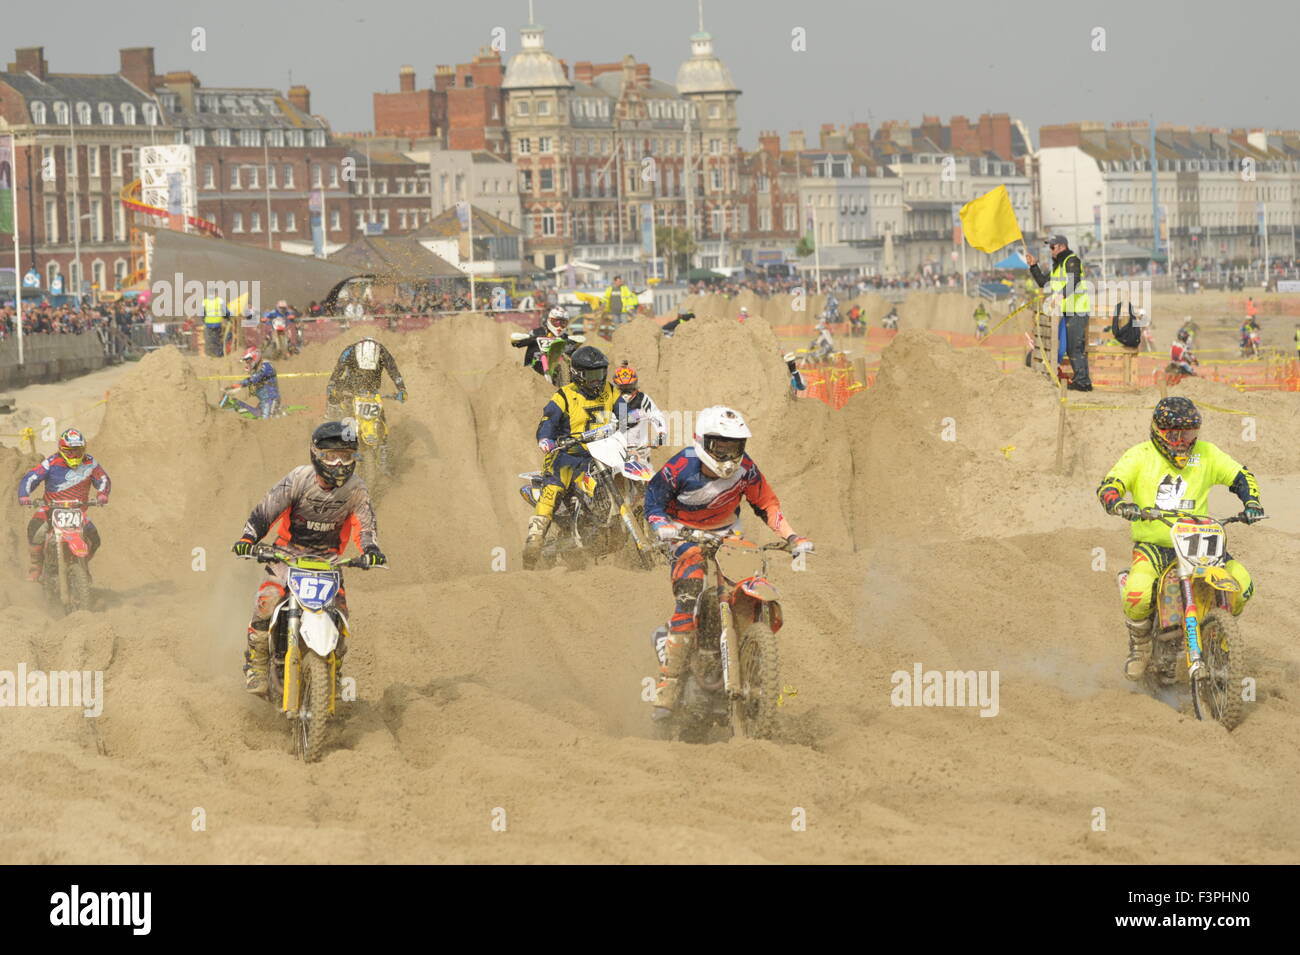 Weymouth, Dorset, UK - 11th October 2015. Annual Lion's Beach motocross weekend on Weymouth Beach.  Weymouth & Portland Lion's  jointly organise the popular event with Purbeck Motocross Club which attracts hundreds of riders, who test themselves on the tricky beach course - Riders competing on the course with the spectacular background of Weymouth seafront - Picture: Graham Hunt/Alamy Live News Stock Photo